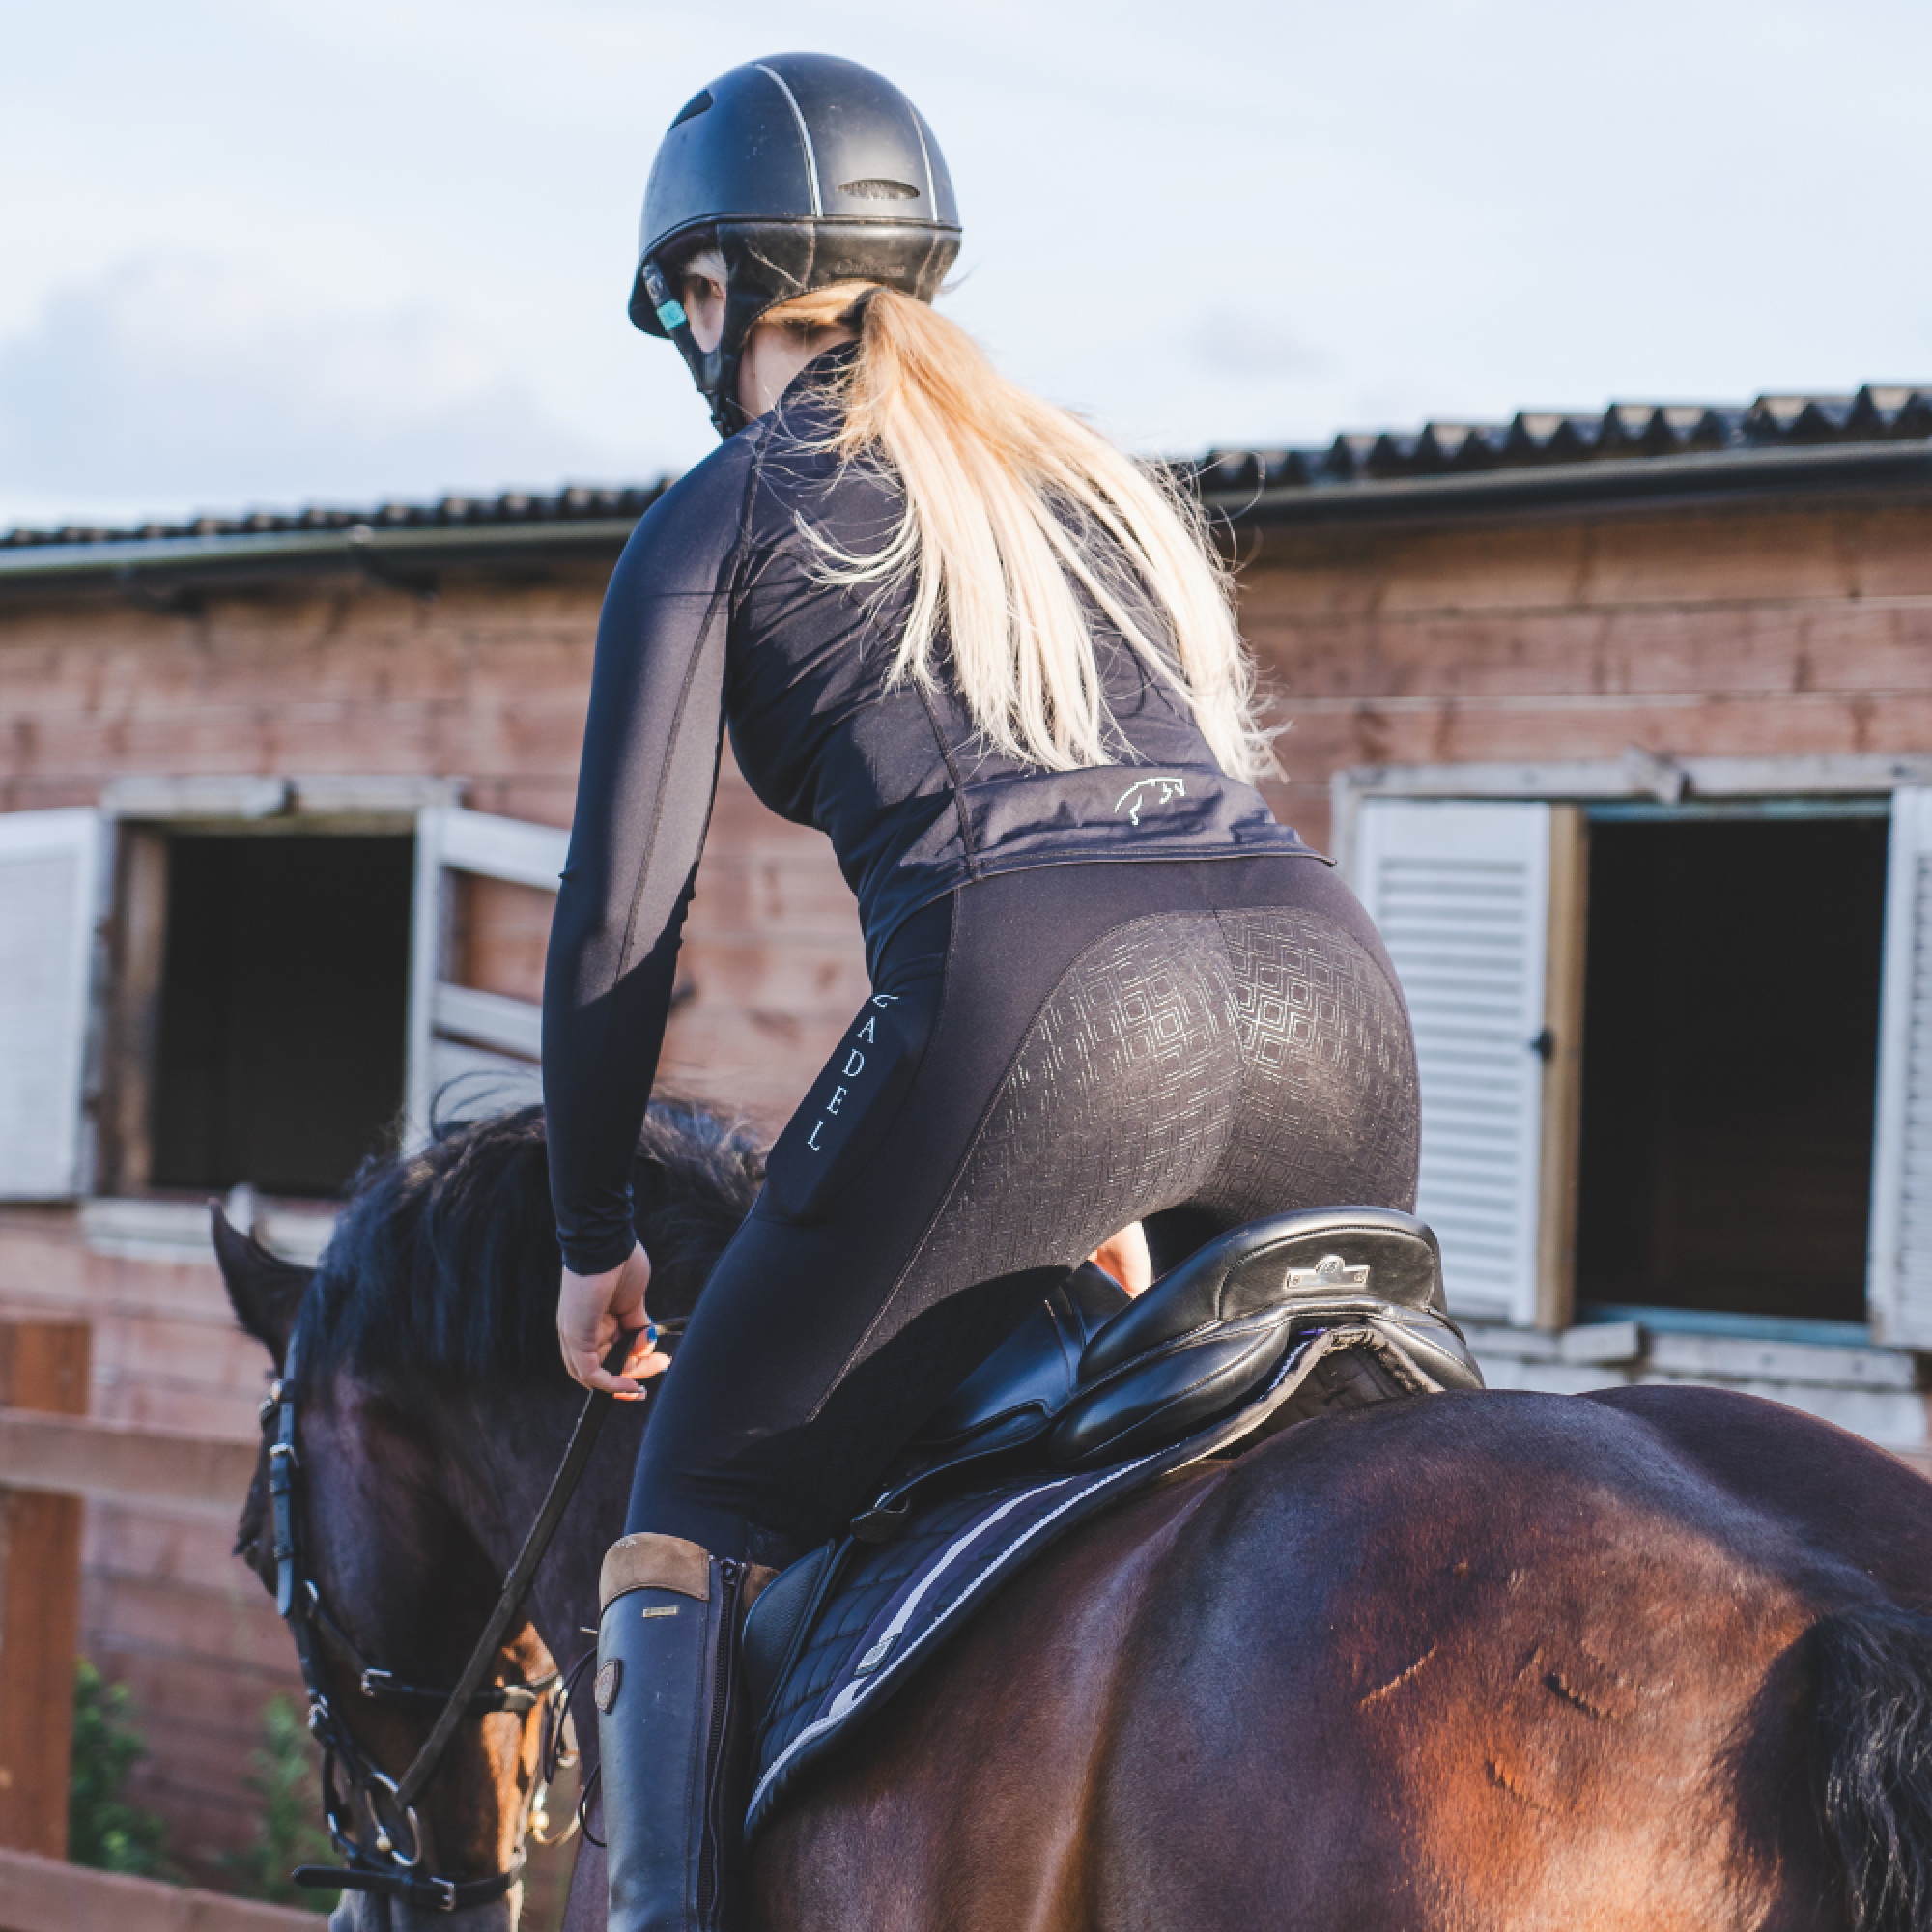 Breeches Vs Jodhpurs: Which is Better to Wear? (Riding Guide)